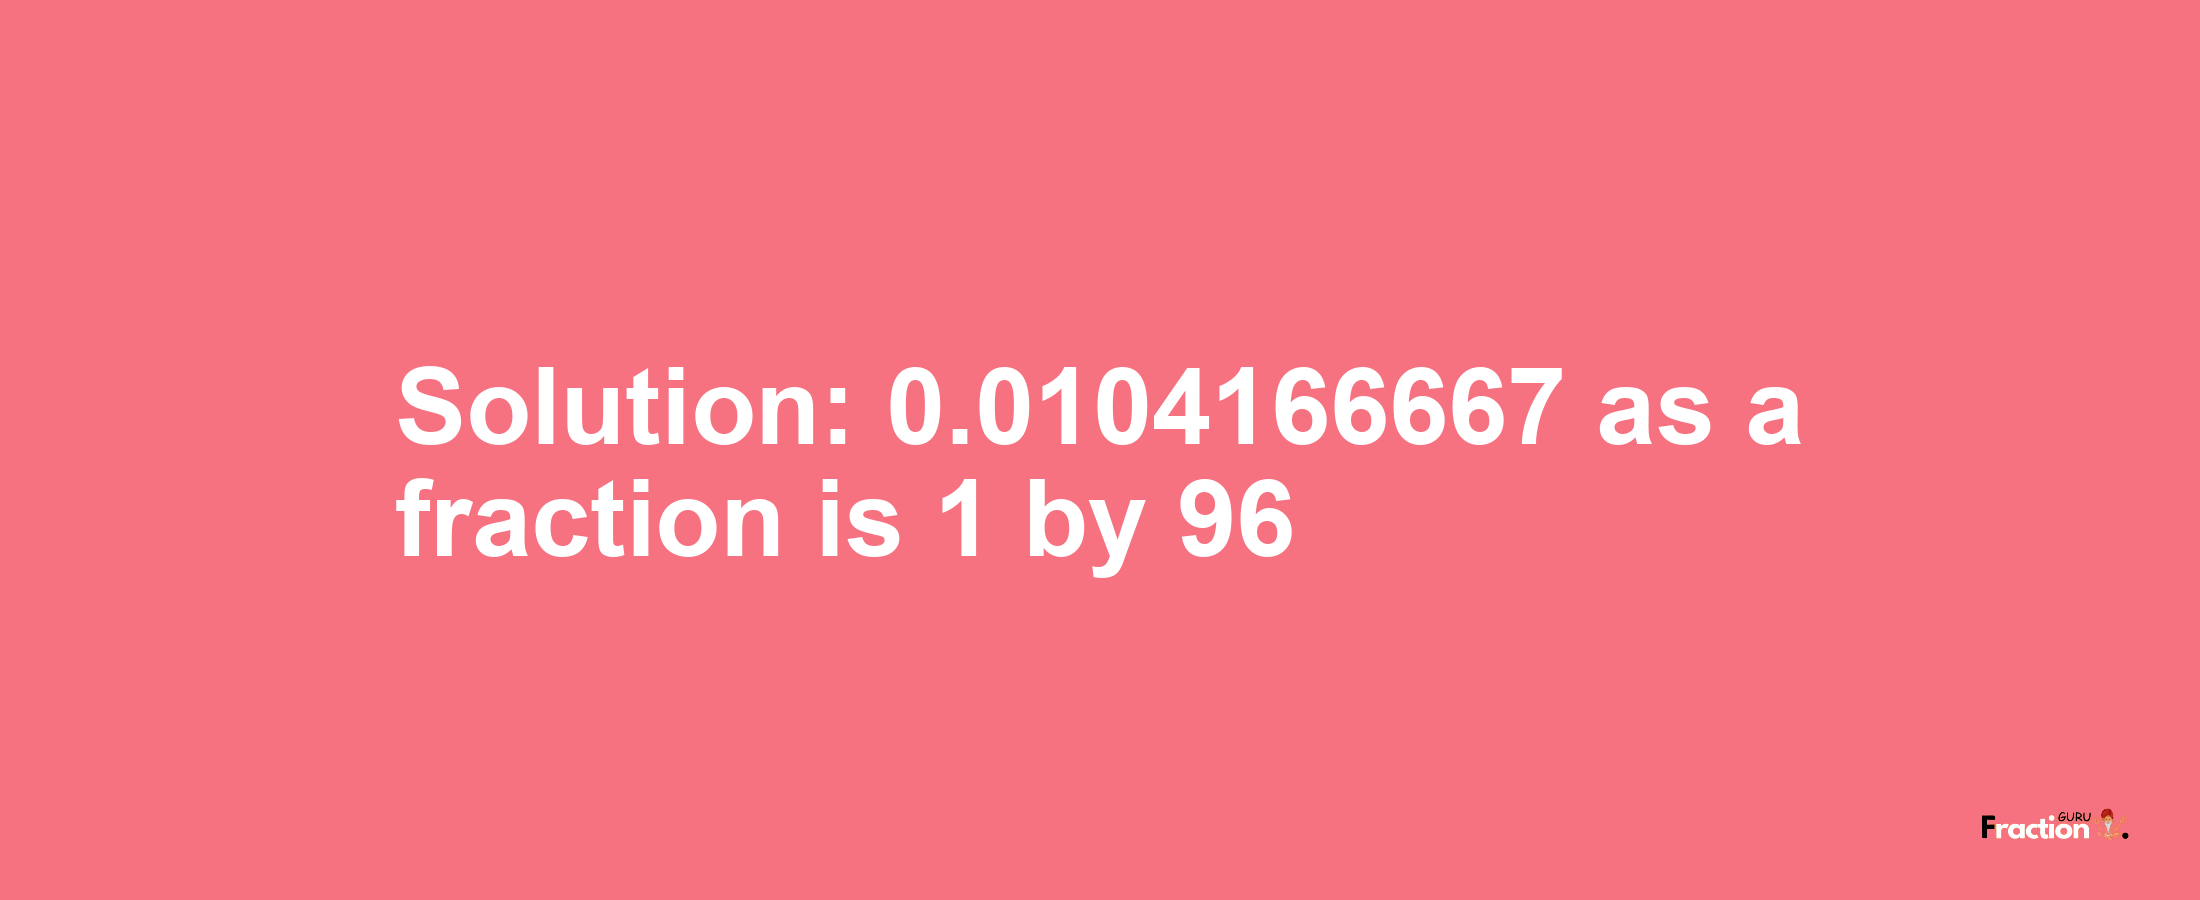 Solution:0.0104166667 as a fraction is 1/96